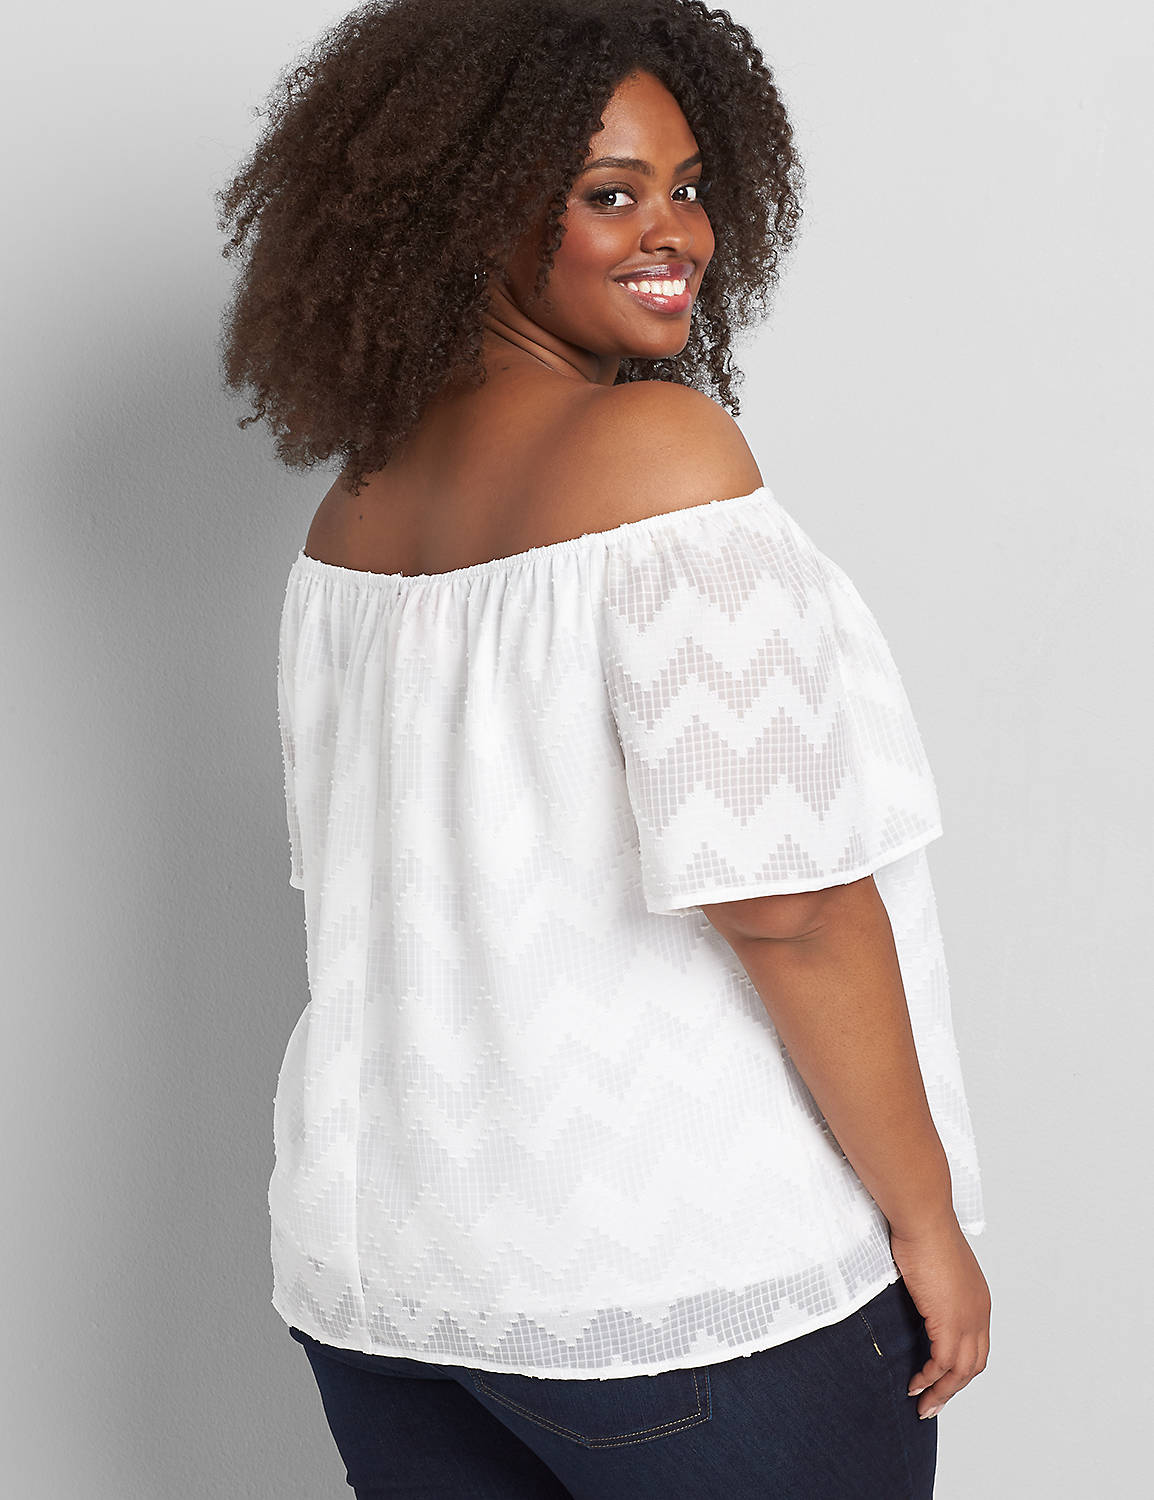 Textured  Off-The-Shoulder Top Product Image 2